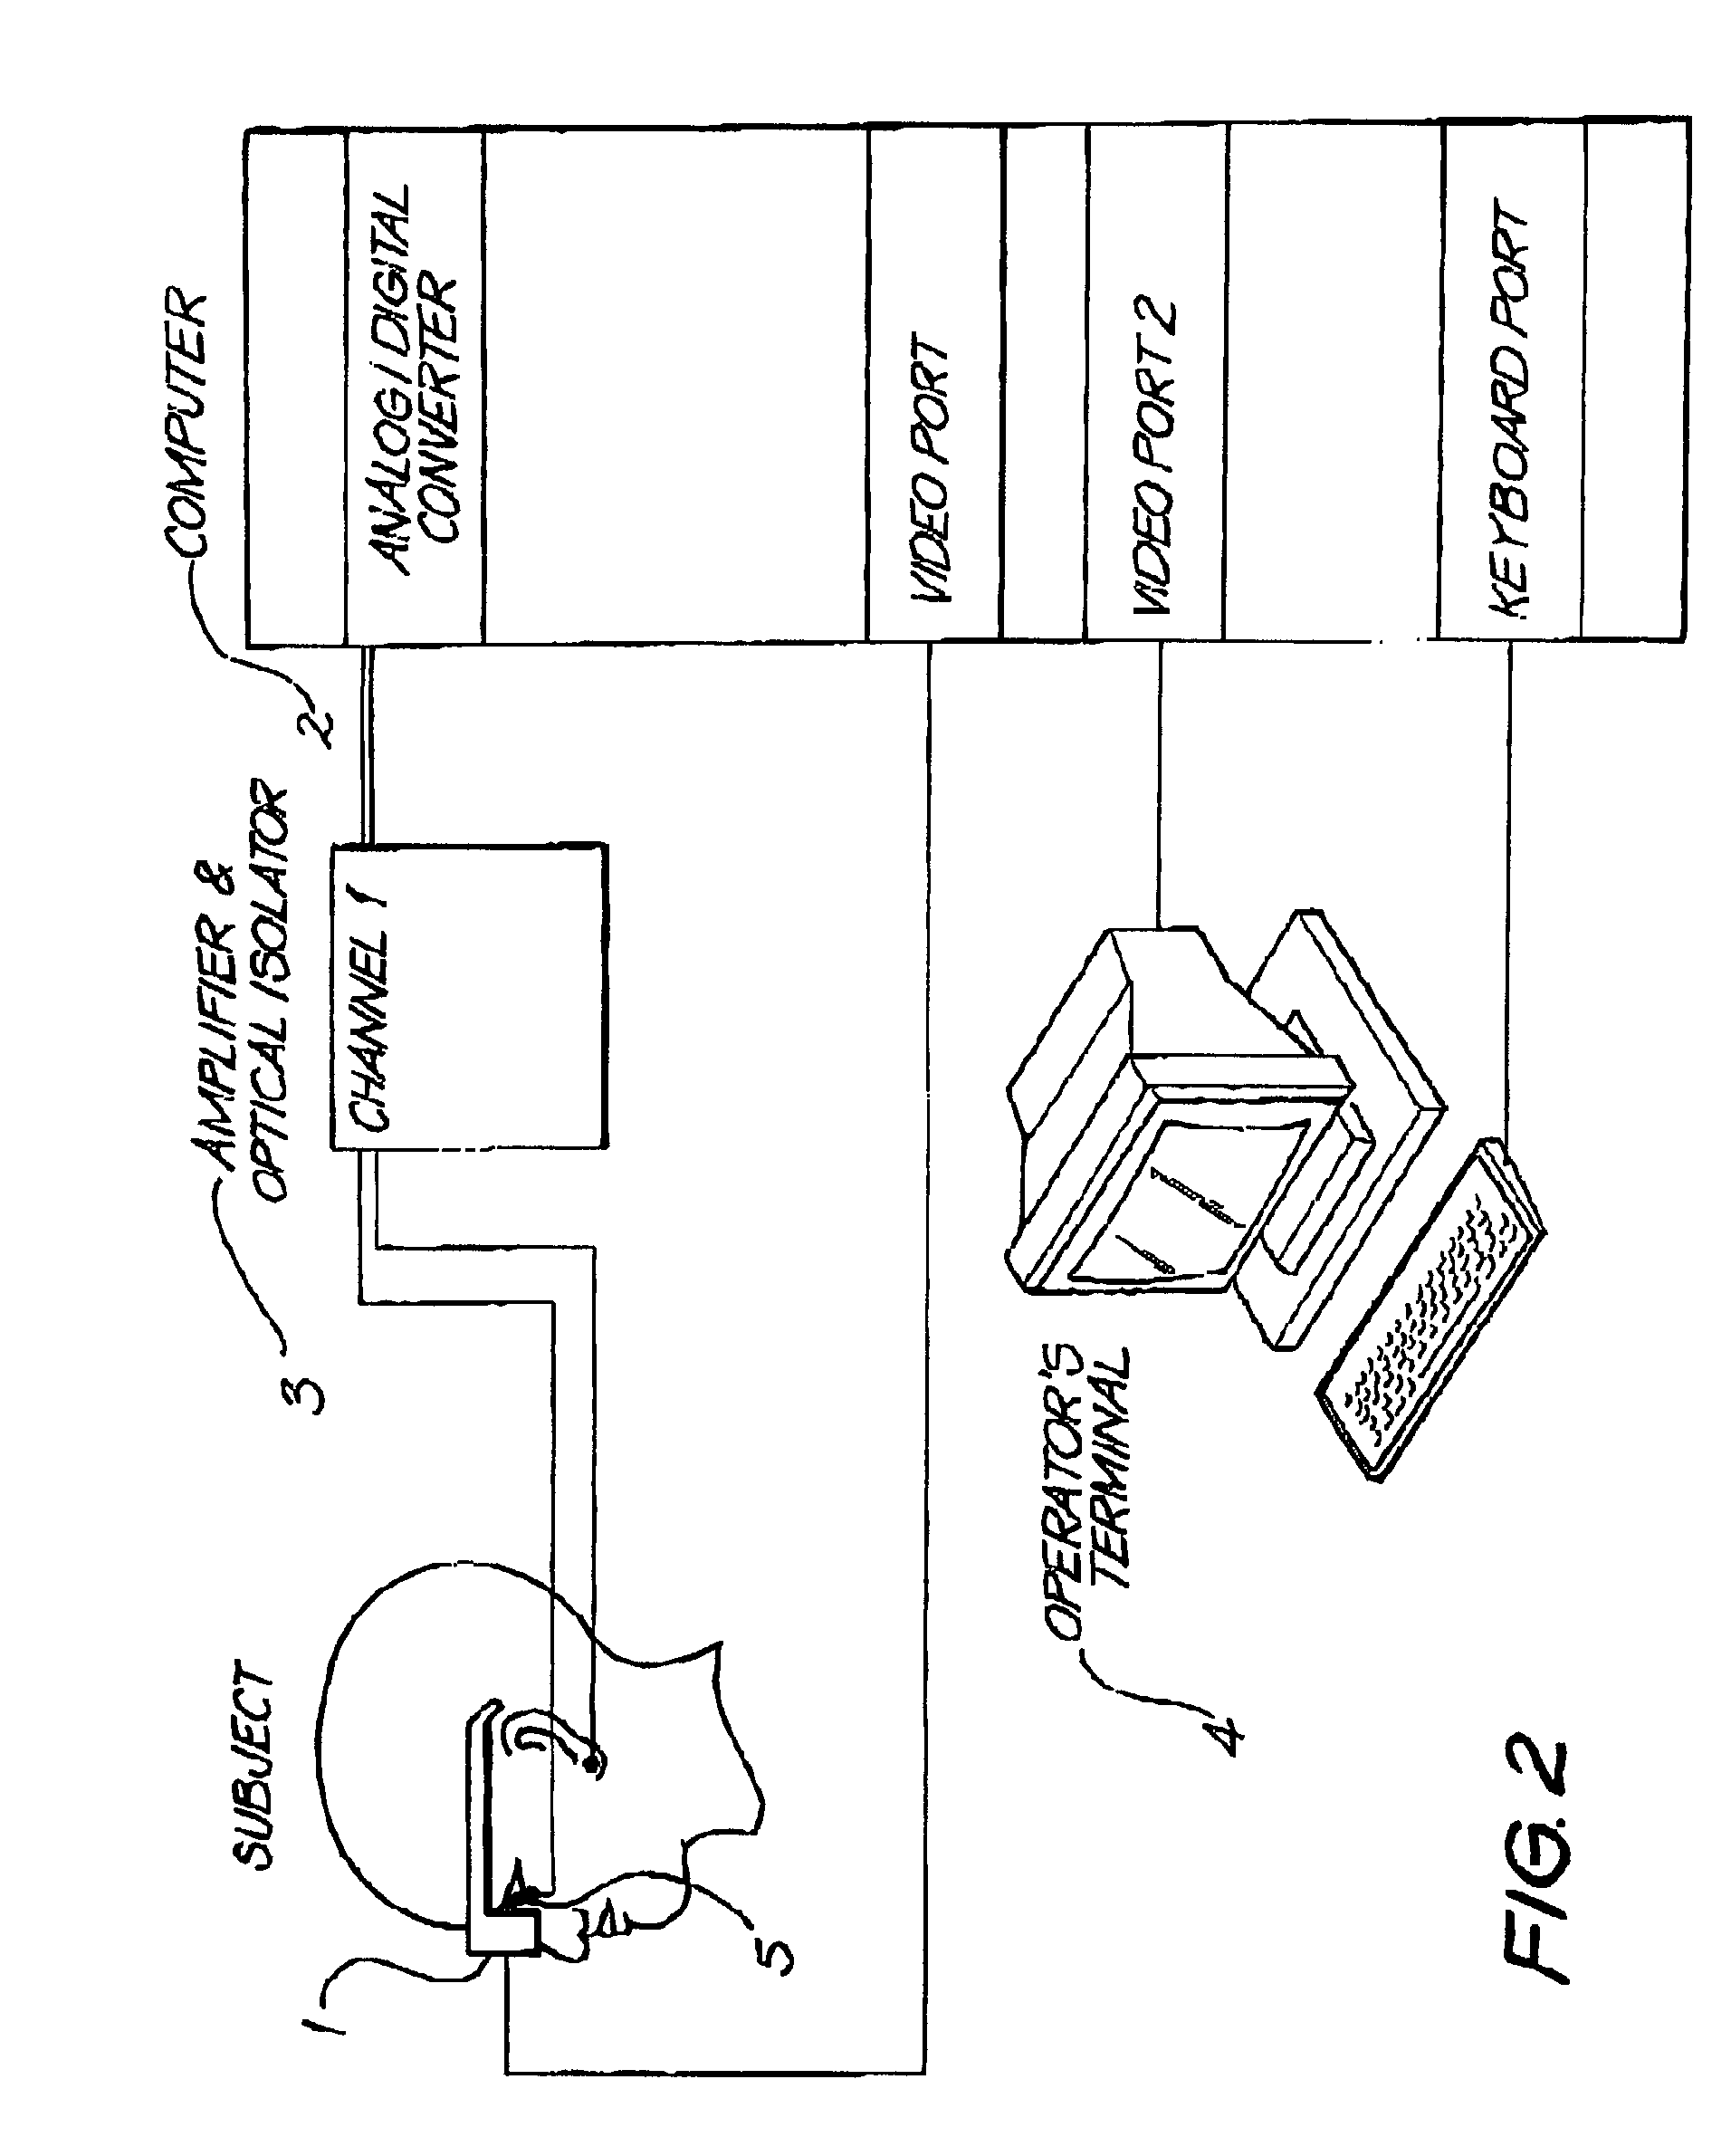 Method and apparatus for objective electrophysiological assessment of visual function